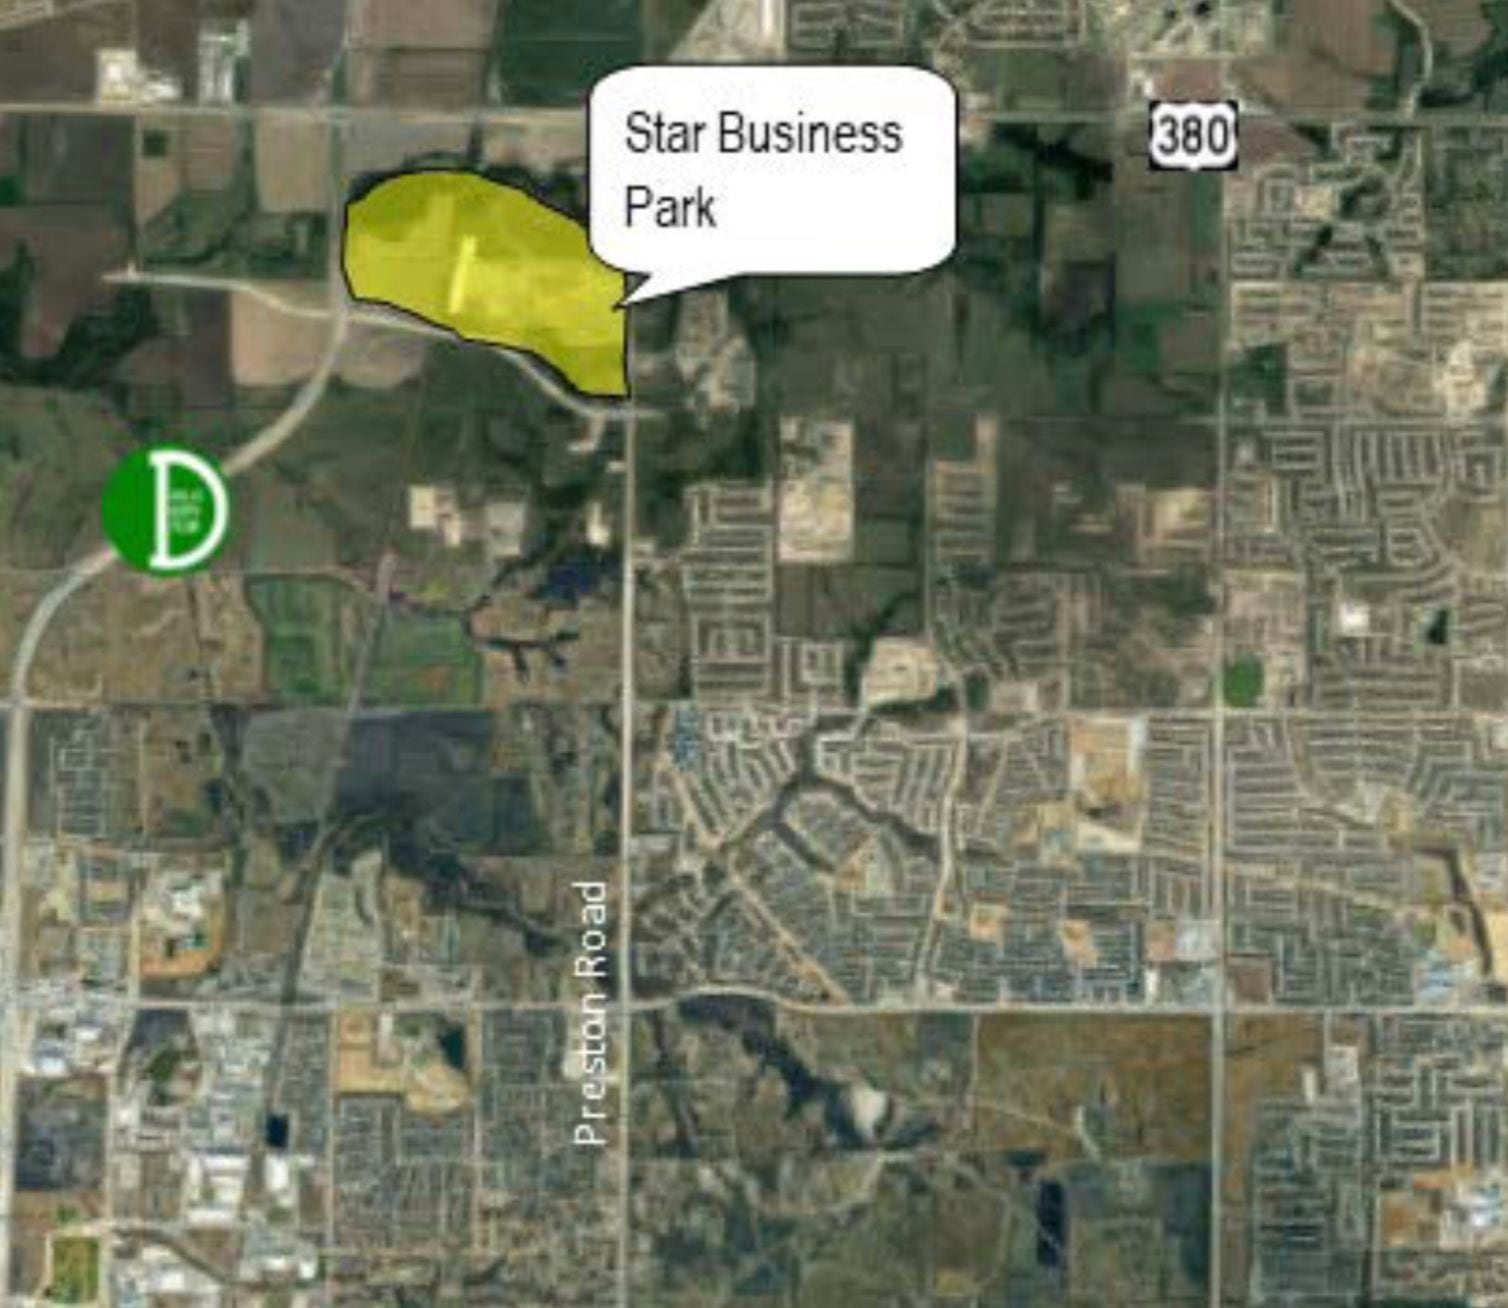 The Star Business Park is on Preston Road just south of U.S. 380.